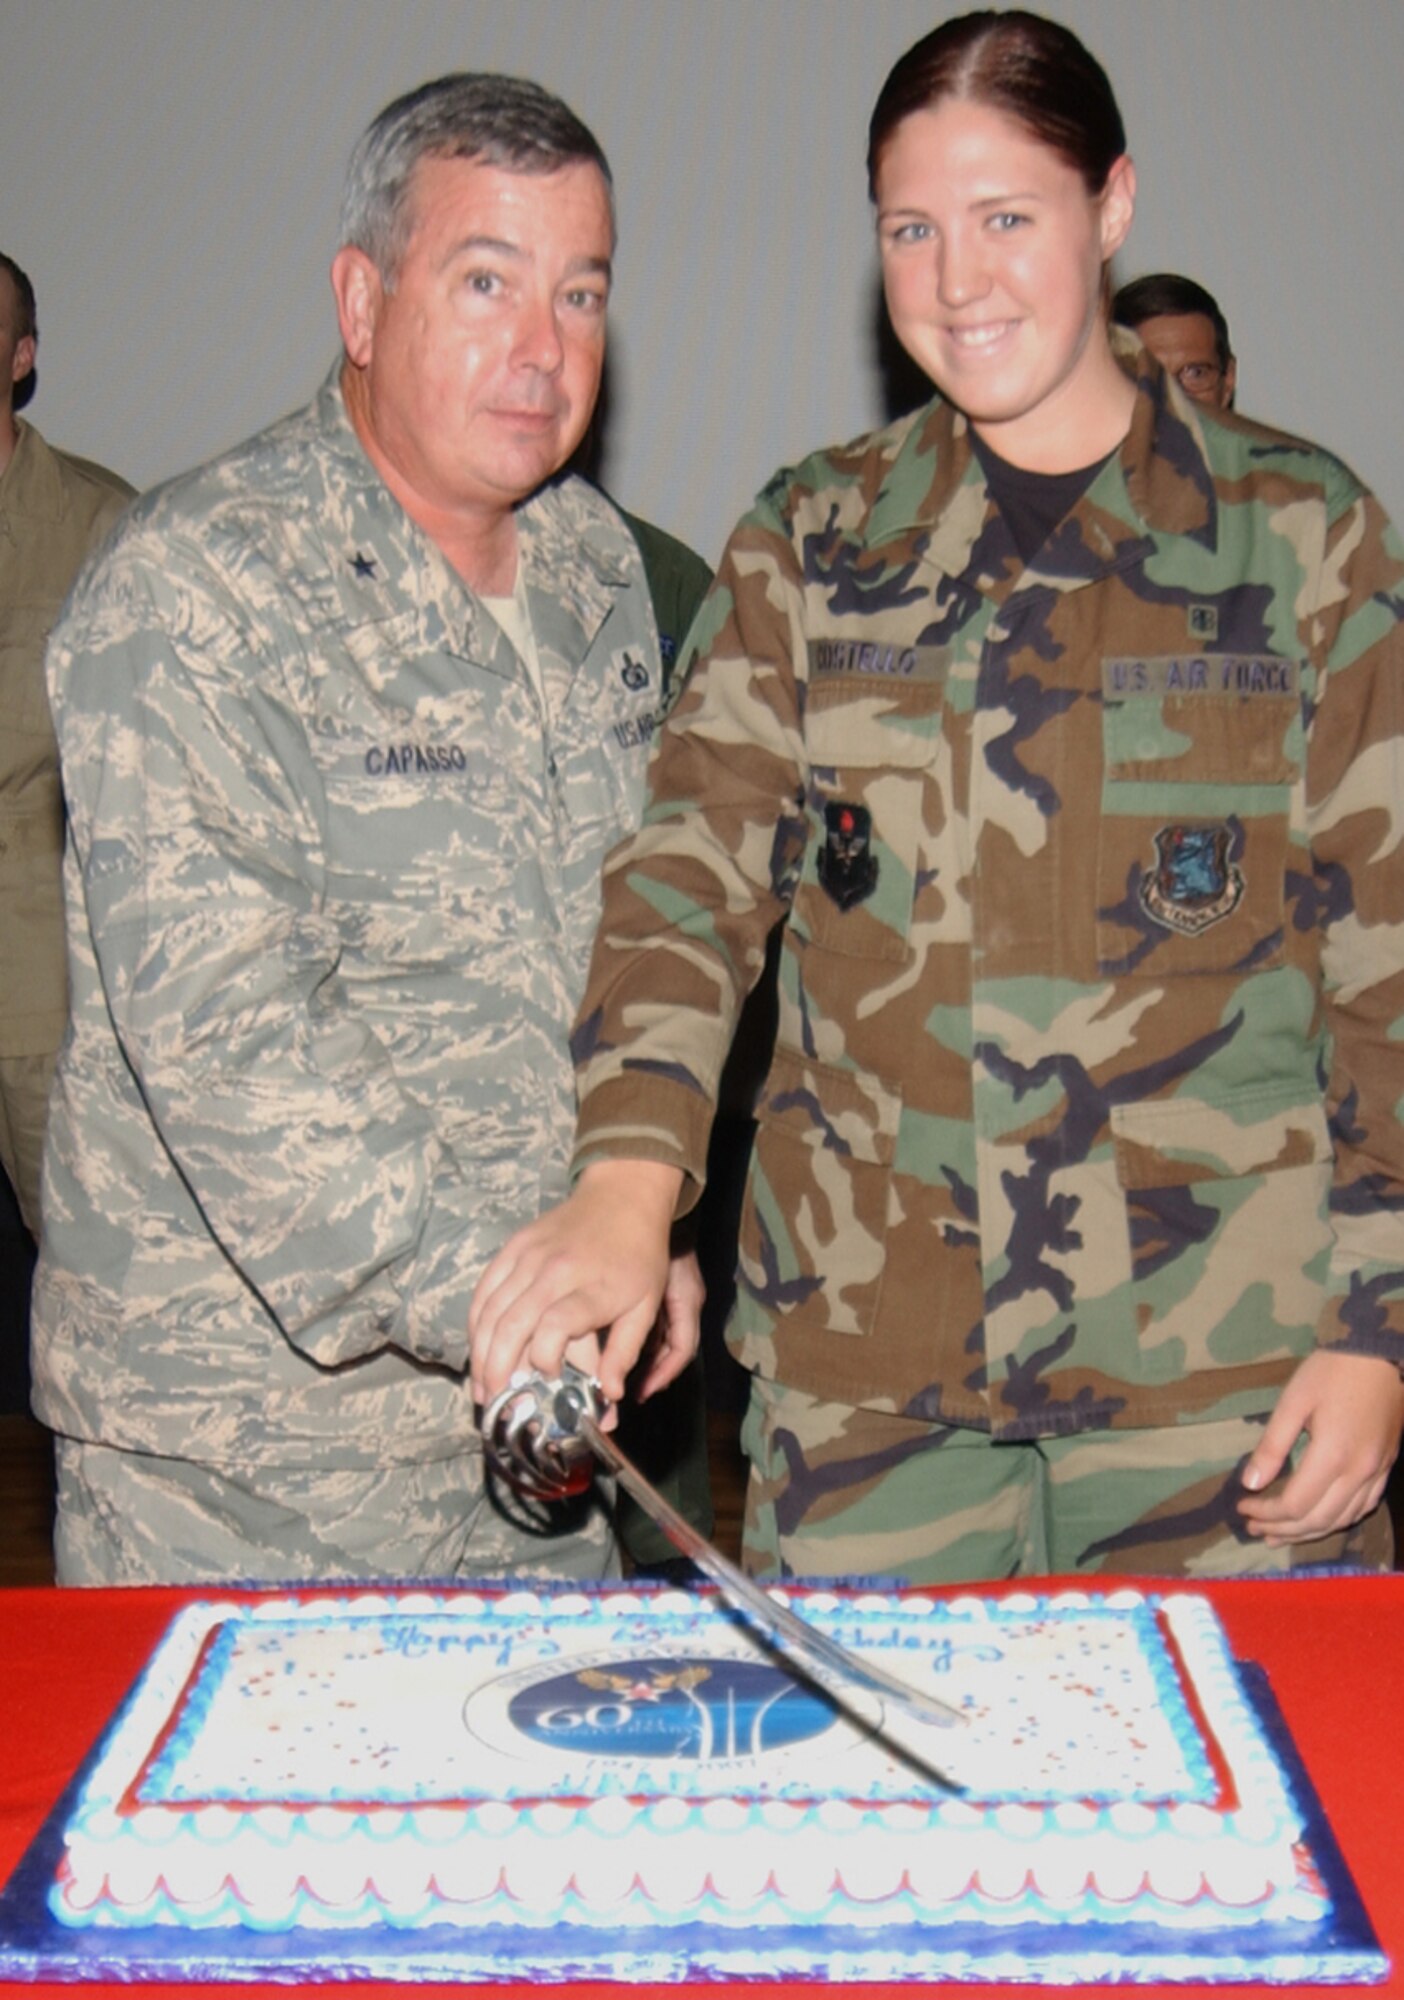 Brig. Gen. Paul Capasso, left, 81st Training Wing commander, and Airman Mary Costello, 81st Medical Operations Squadron, cut the Air Force birthday cake Sept. 18.  Airman Costello, 18, is the youngest permanent-party member assigned to Keesler.  (U.S. Air Force photo by Kemberly Groue)